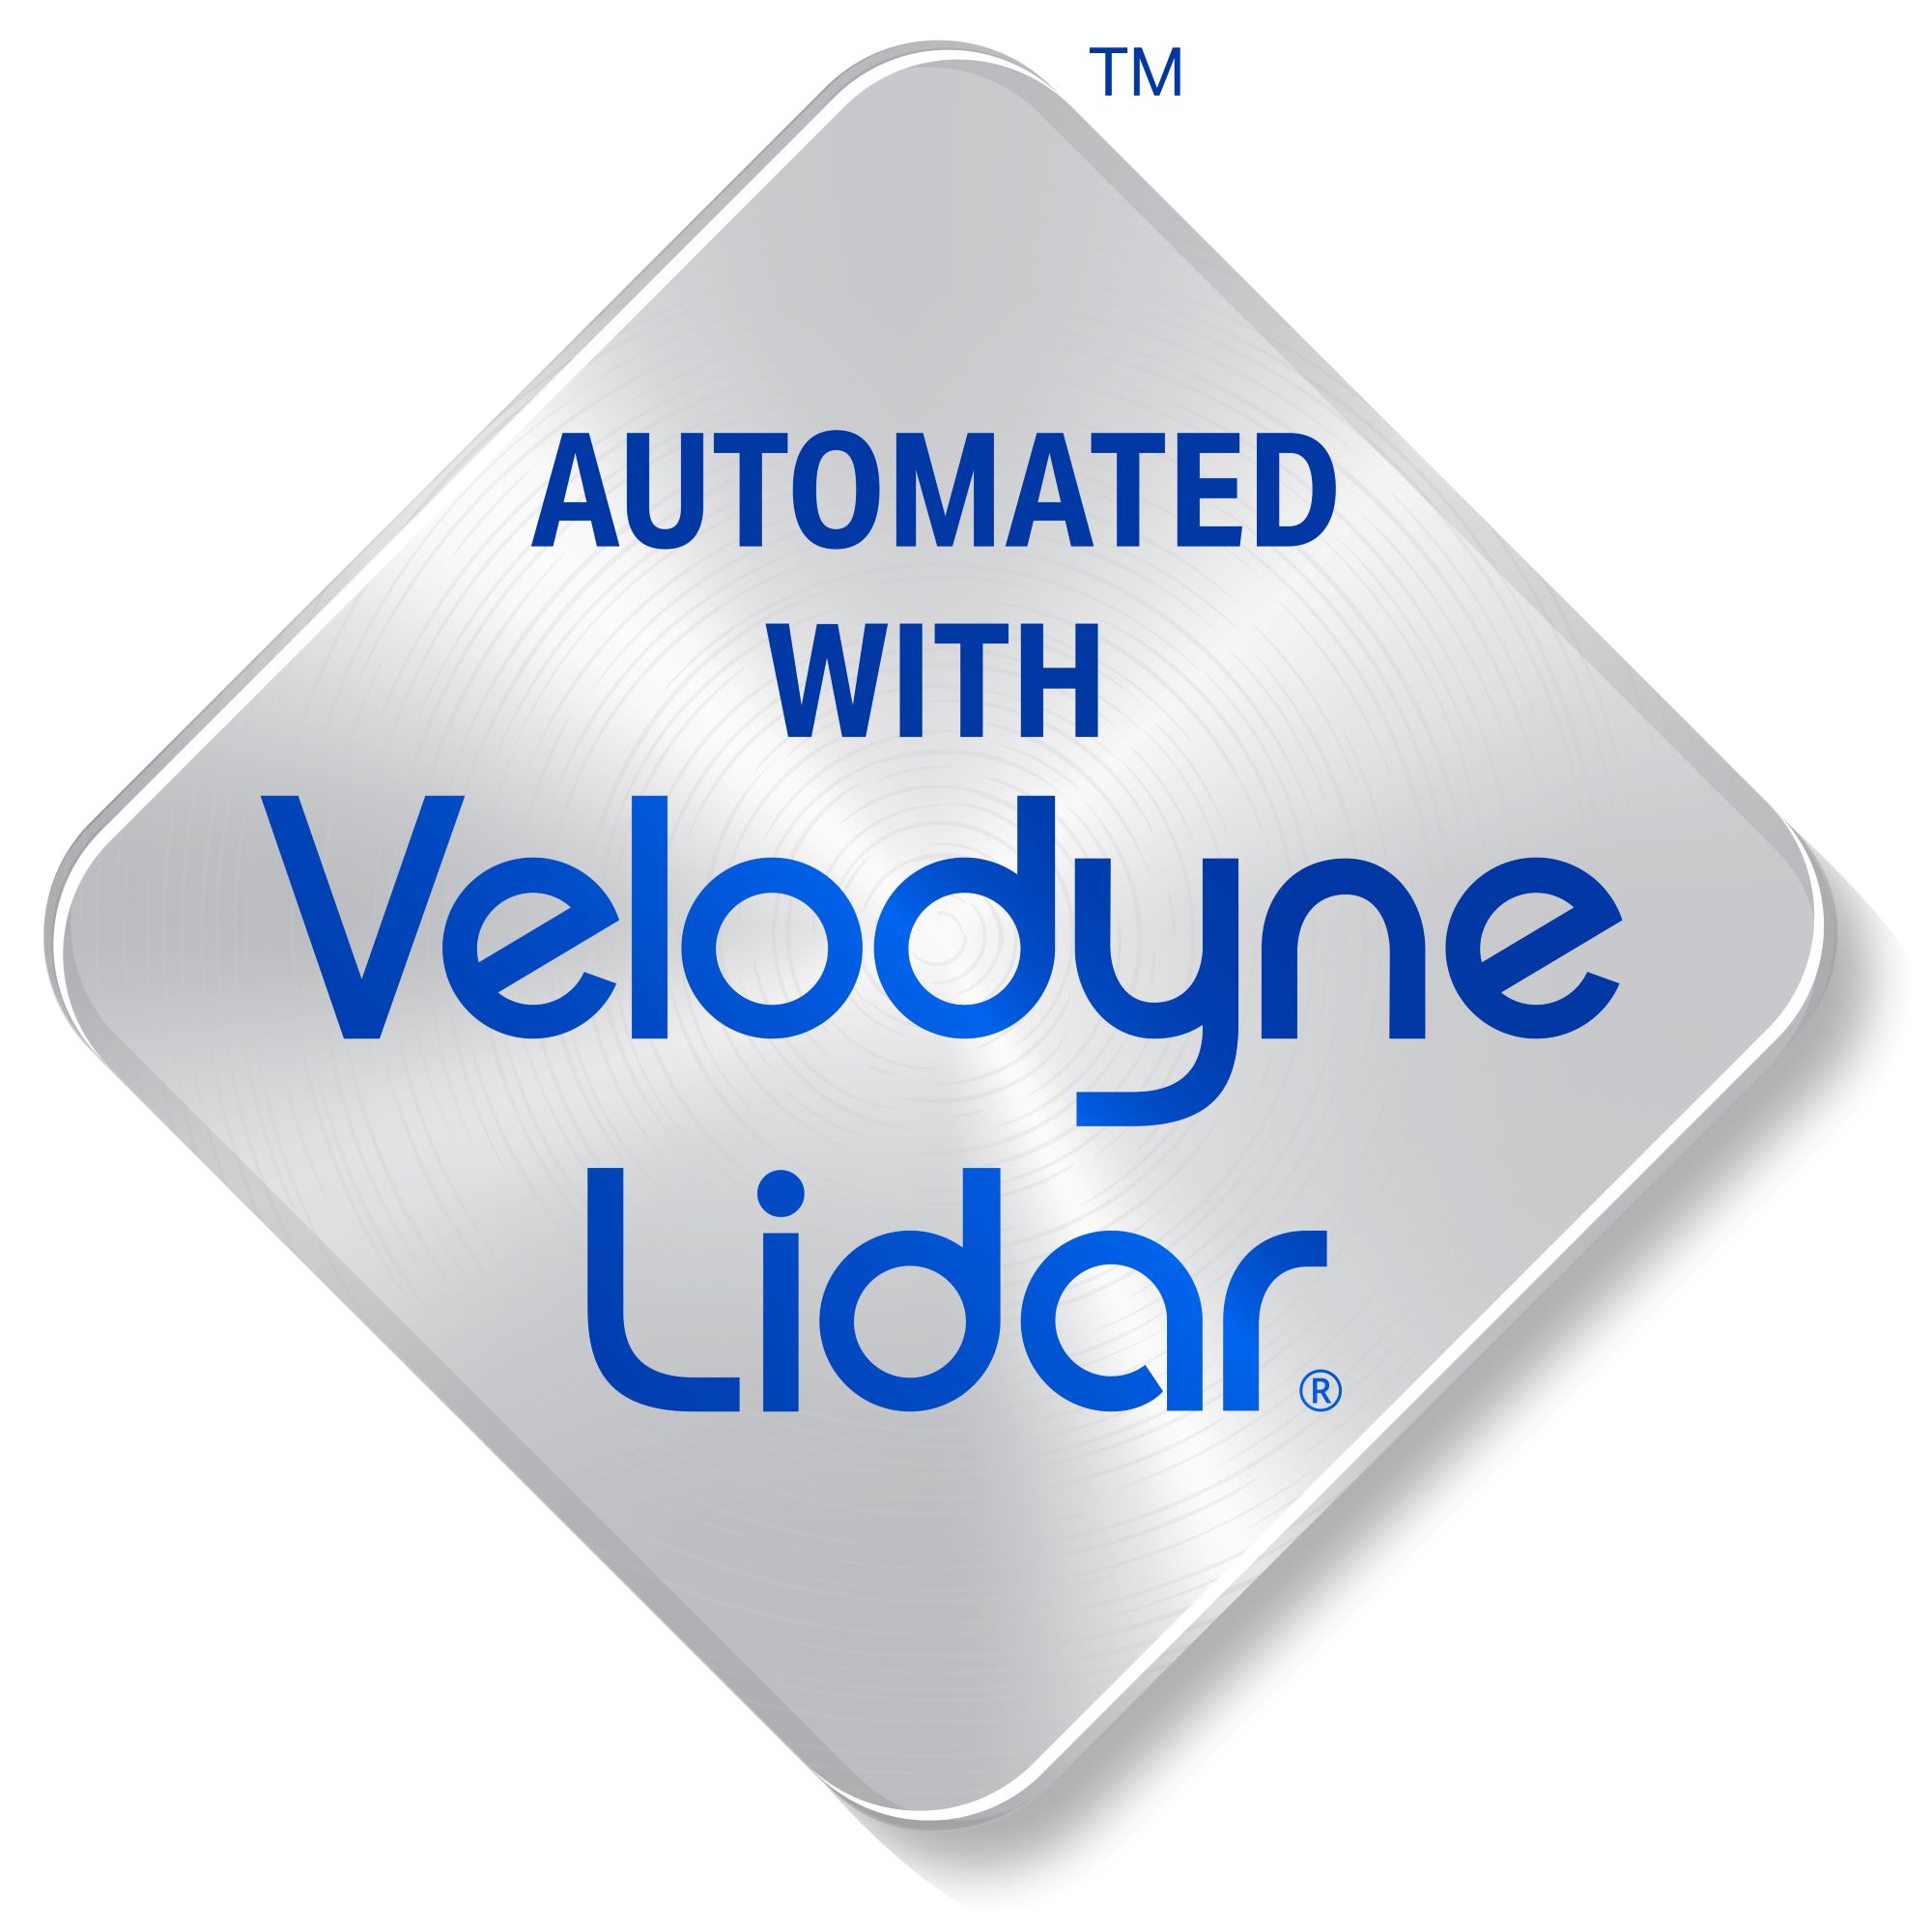 Automated with Velodyne